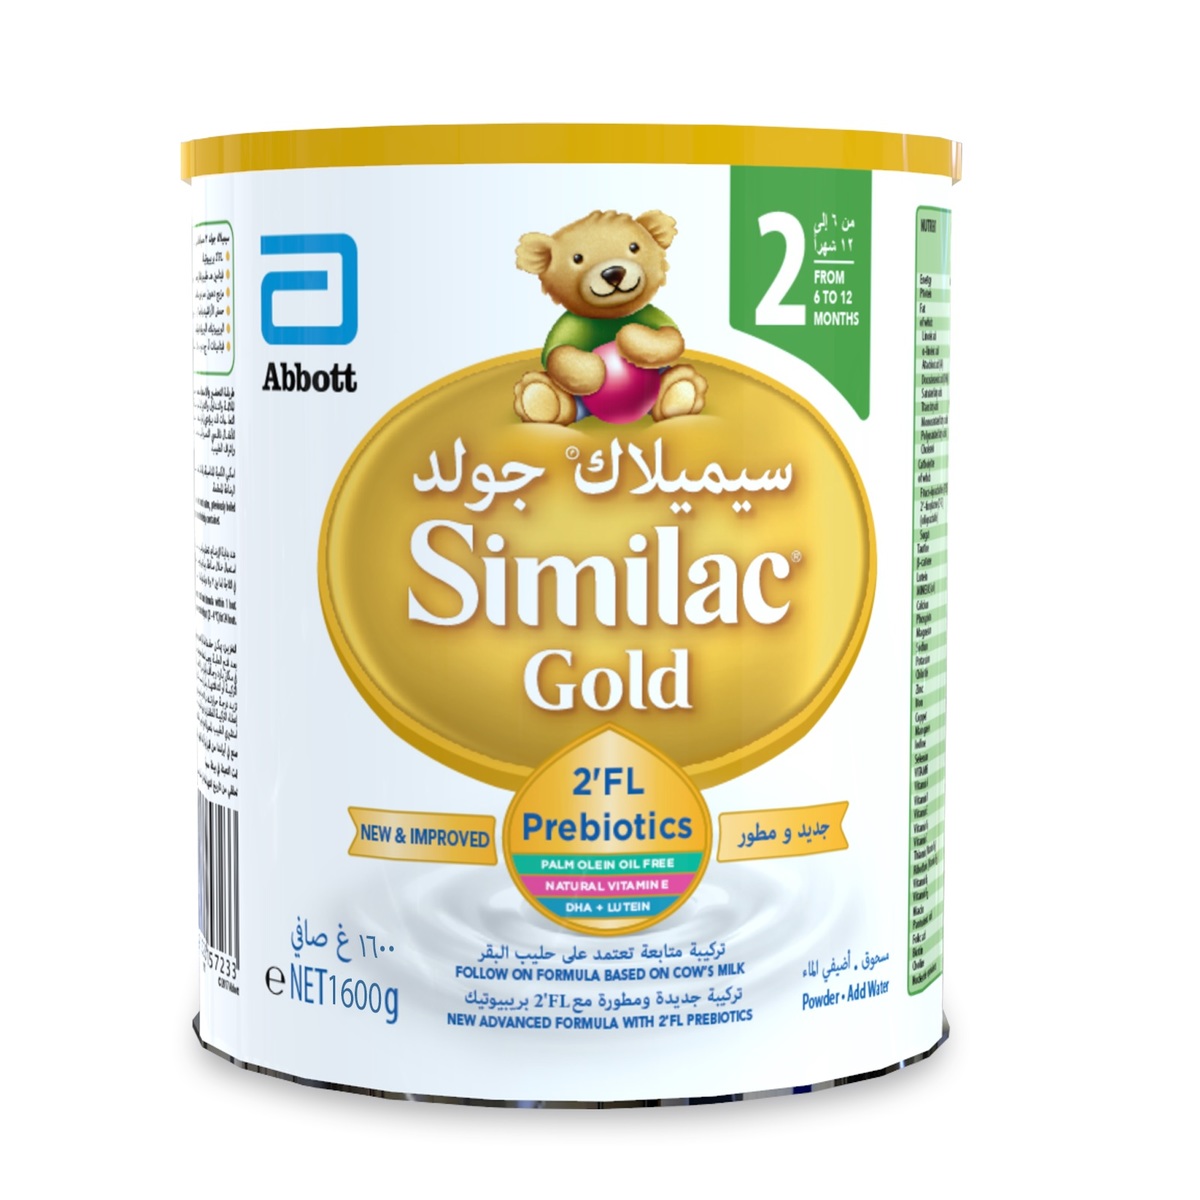 Blemil Plus 2 Optimum Protech Follow-On Formula Cow'S Milk Powder For  Infant From 6 To 12 Months 400 G, White price in Saudi Arabia,   Saudi Arabia